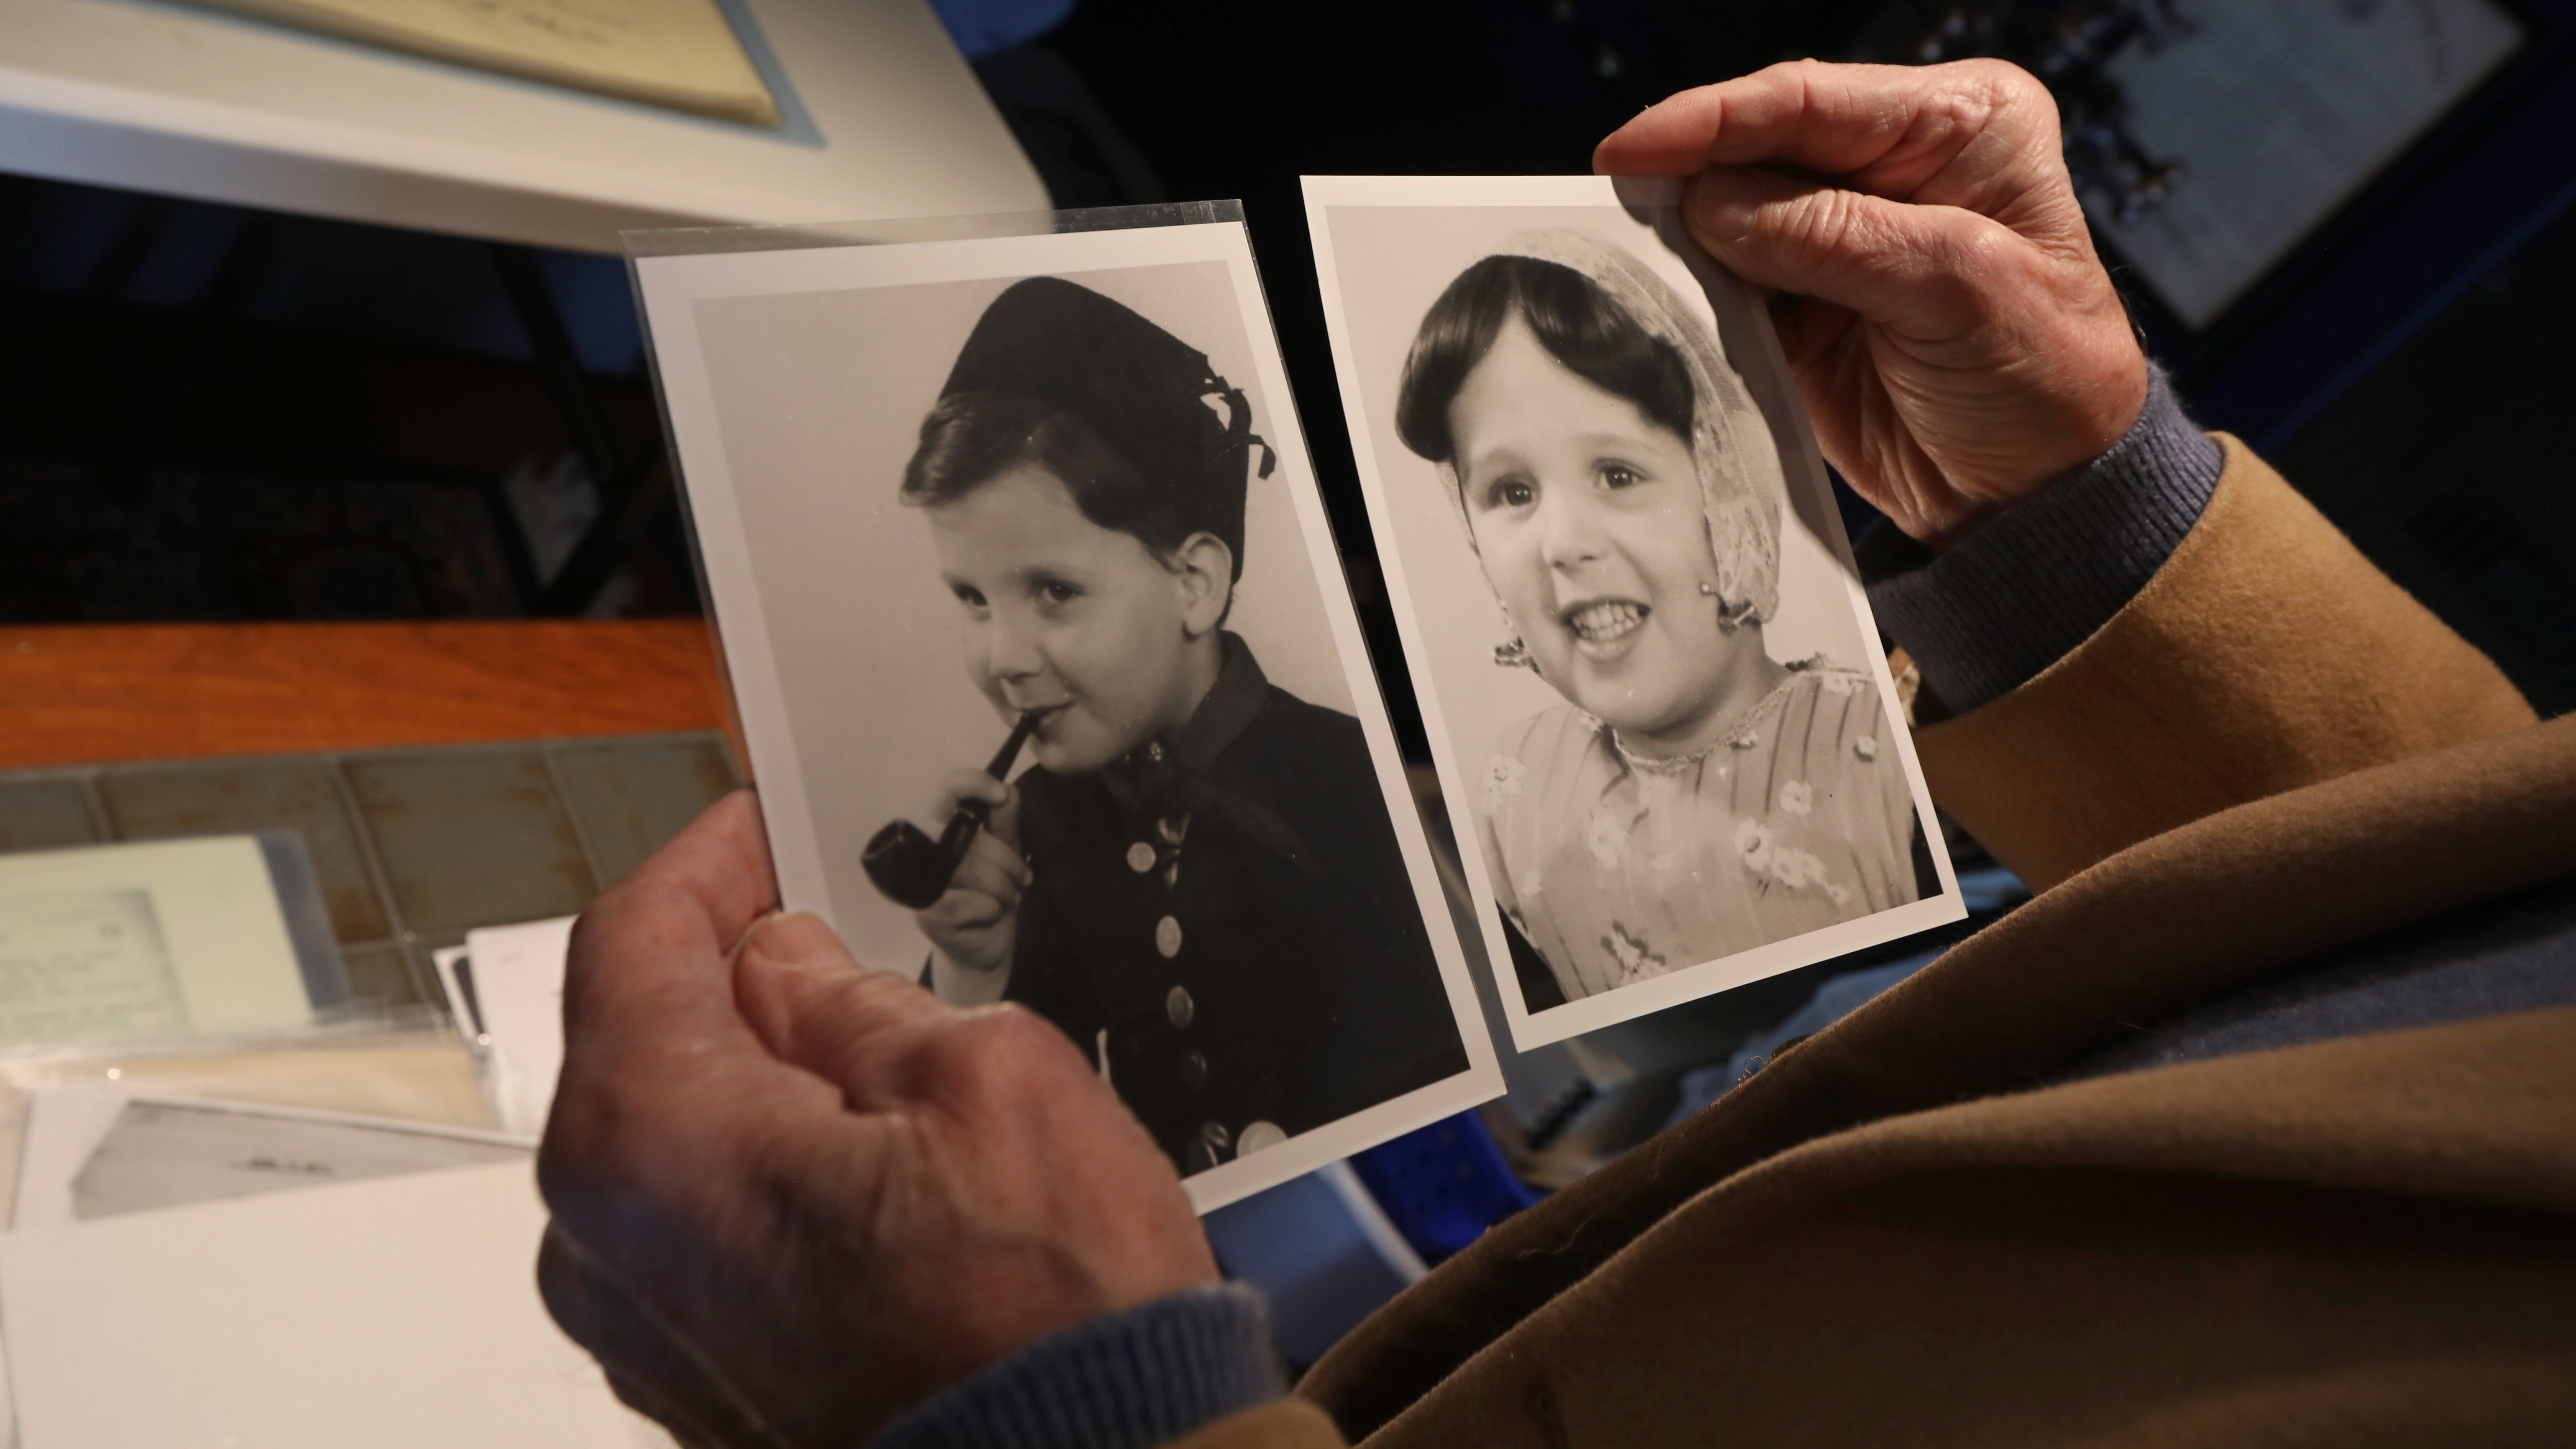 Steven Hess holds a photo of himself and his twin sister Marion Ein Lewin, dressed in traditional Dutch costumes that was taken about a year before they were deported to the Westerbork and Bergen-Belsen Concentration Camps in 1944.